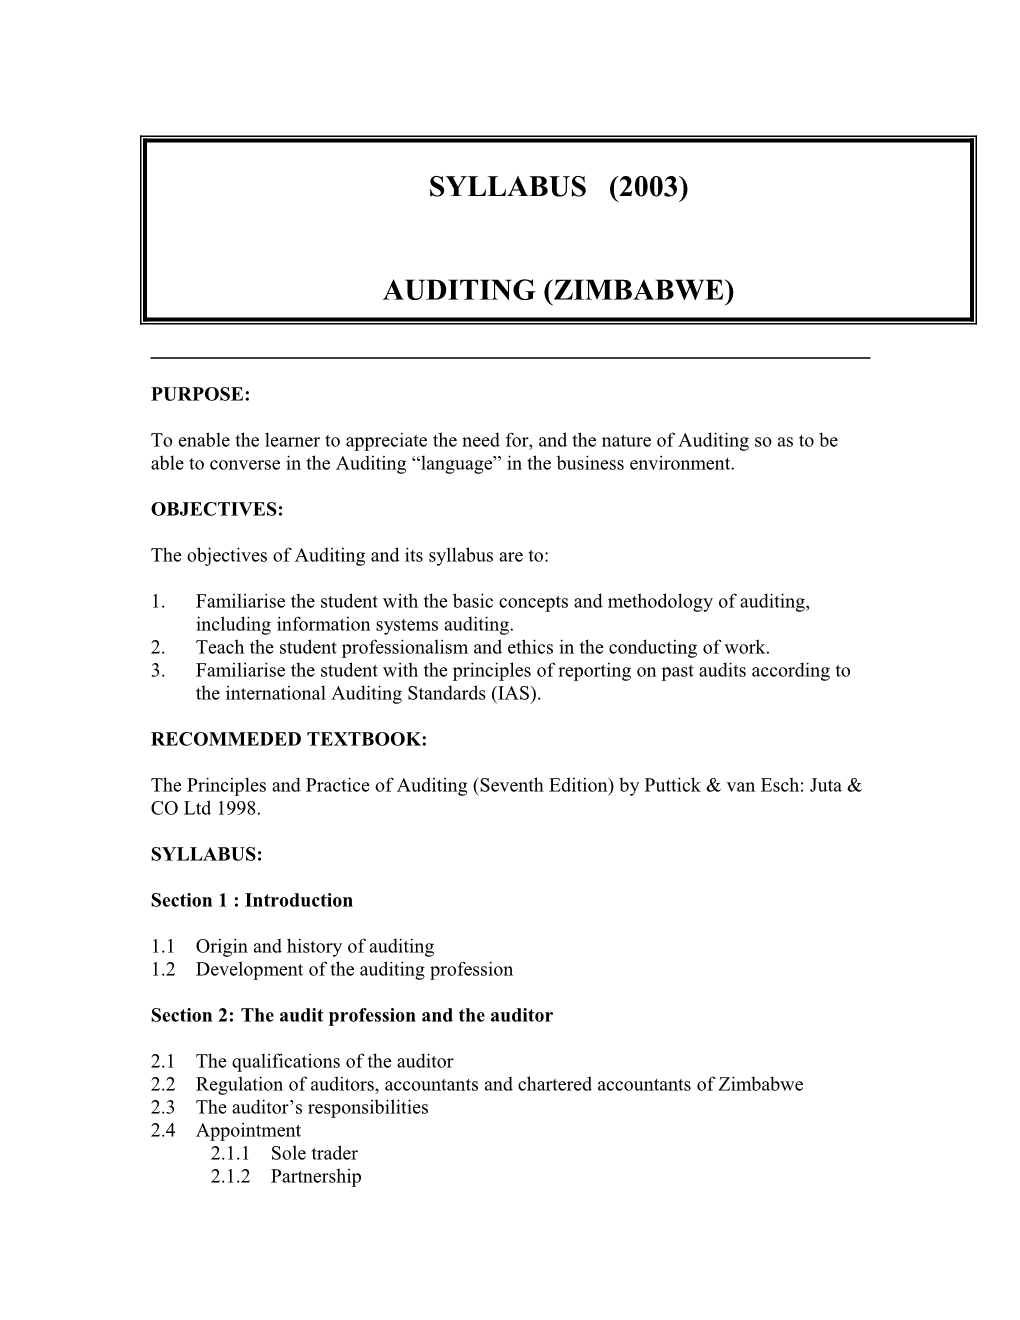 The Objectives of Auditing and Its Syllabus Are To